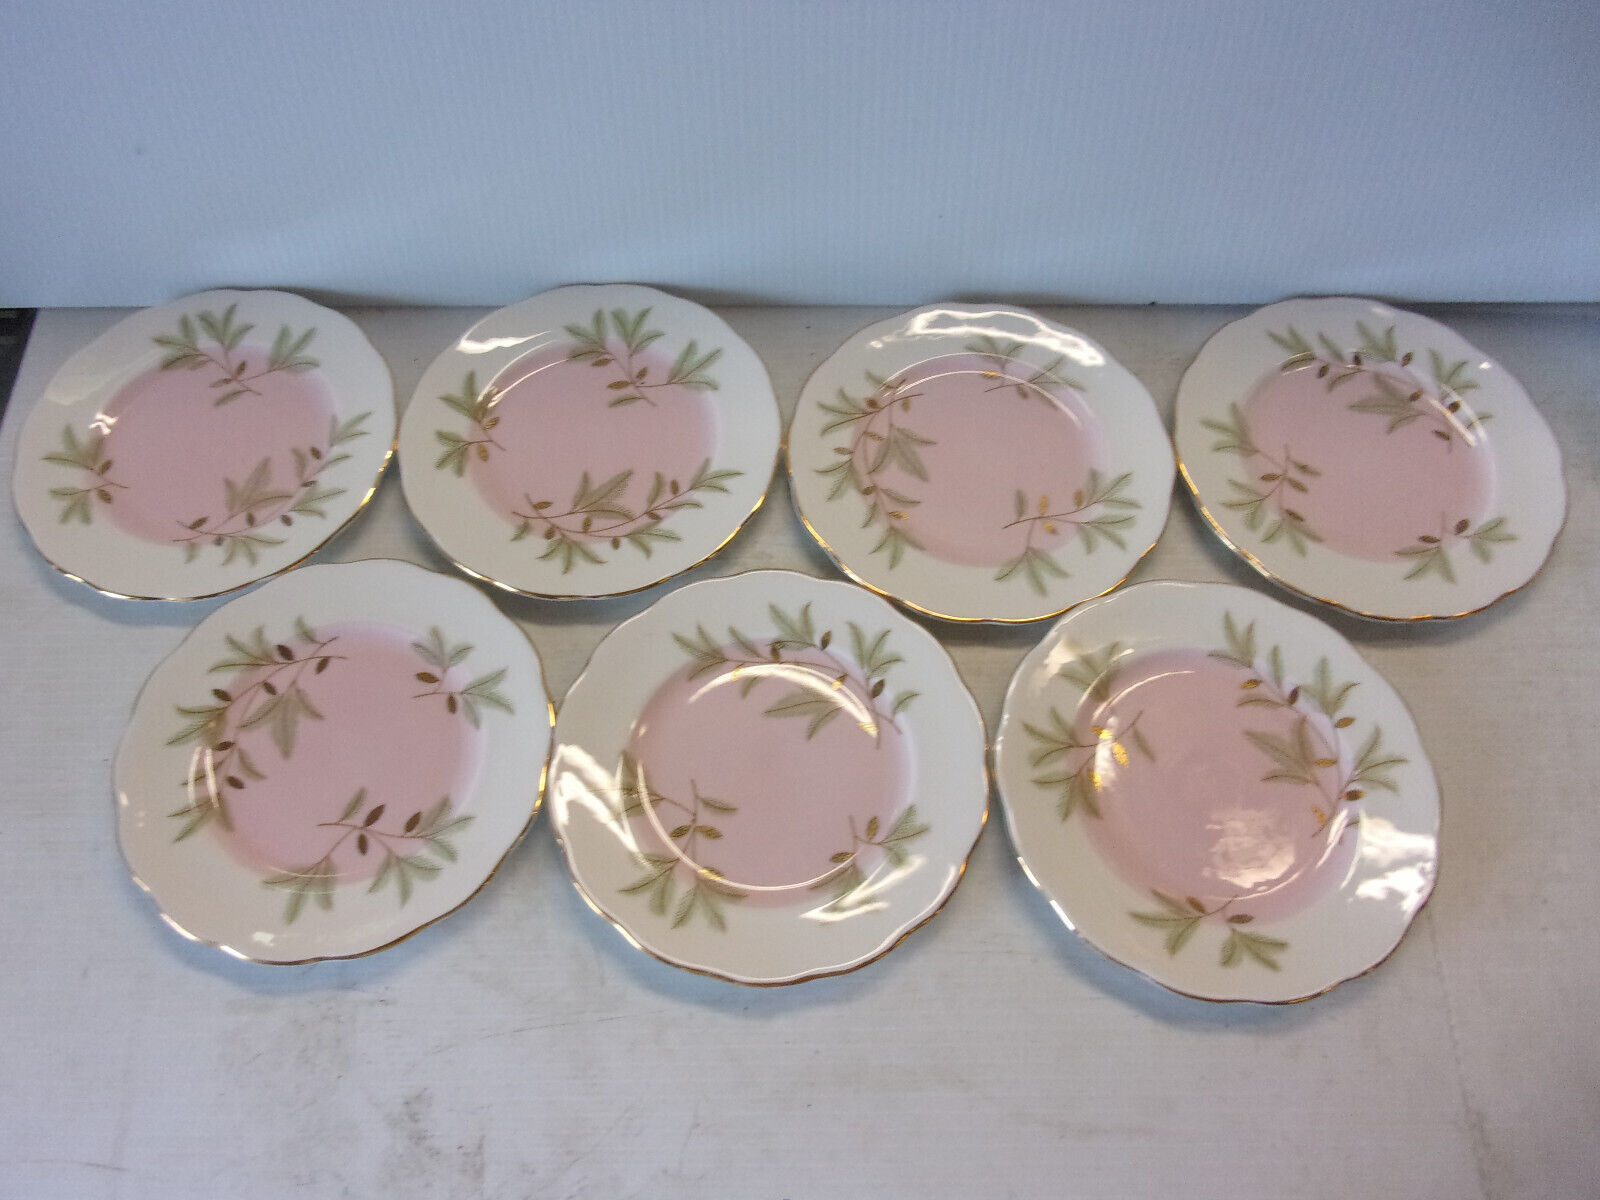 Primary image for "Royal Albert" Bone China "Braemar" 7 small plates, 6-3/8" conch pink with pine